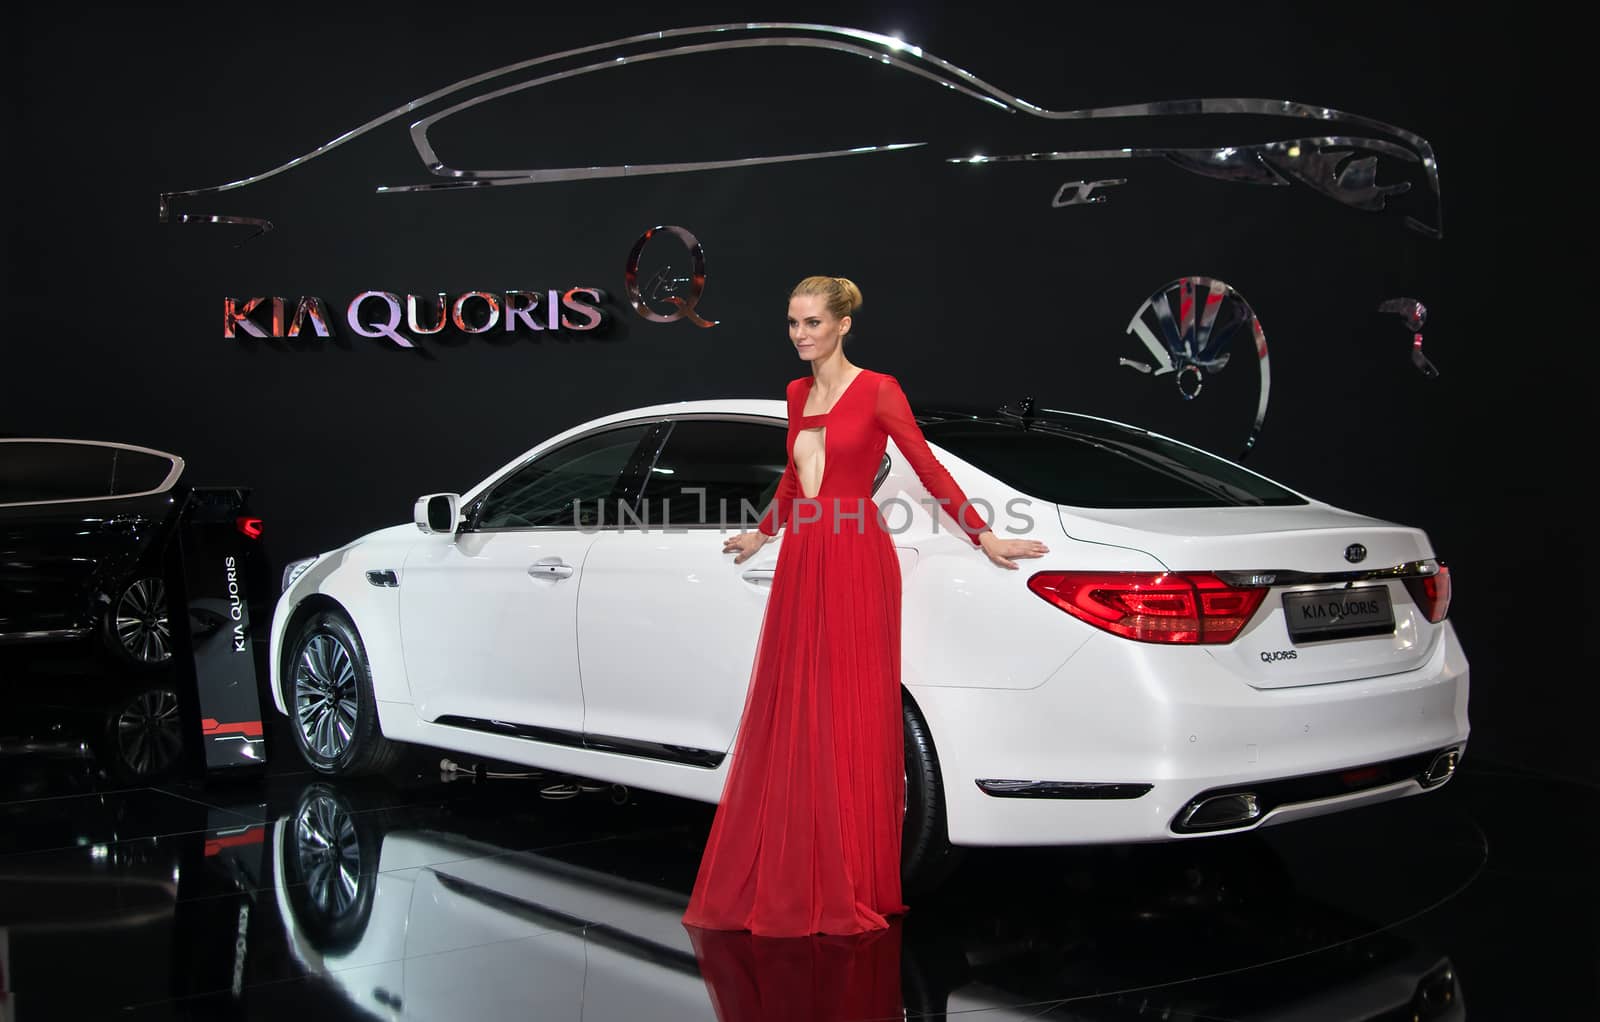 MOSCOW-SEPTEMBER 2: Kia Quoris at the Moscow International Automobile Salon on September 2, 2014 in Moscow, Russia